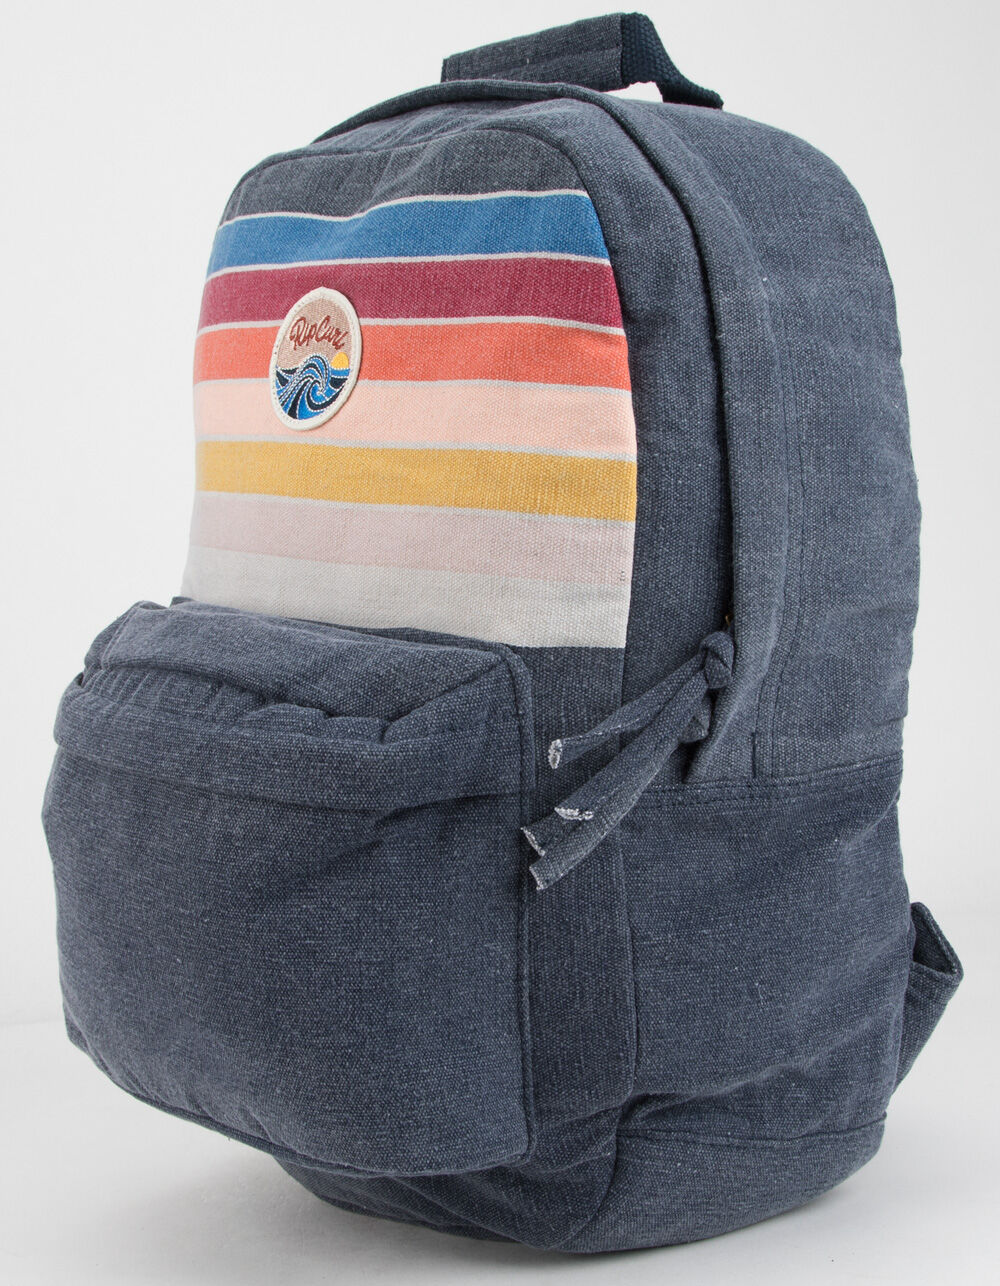 RIP CURL Keep On Surfin Backpack - NAVY | Tillys